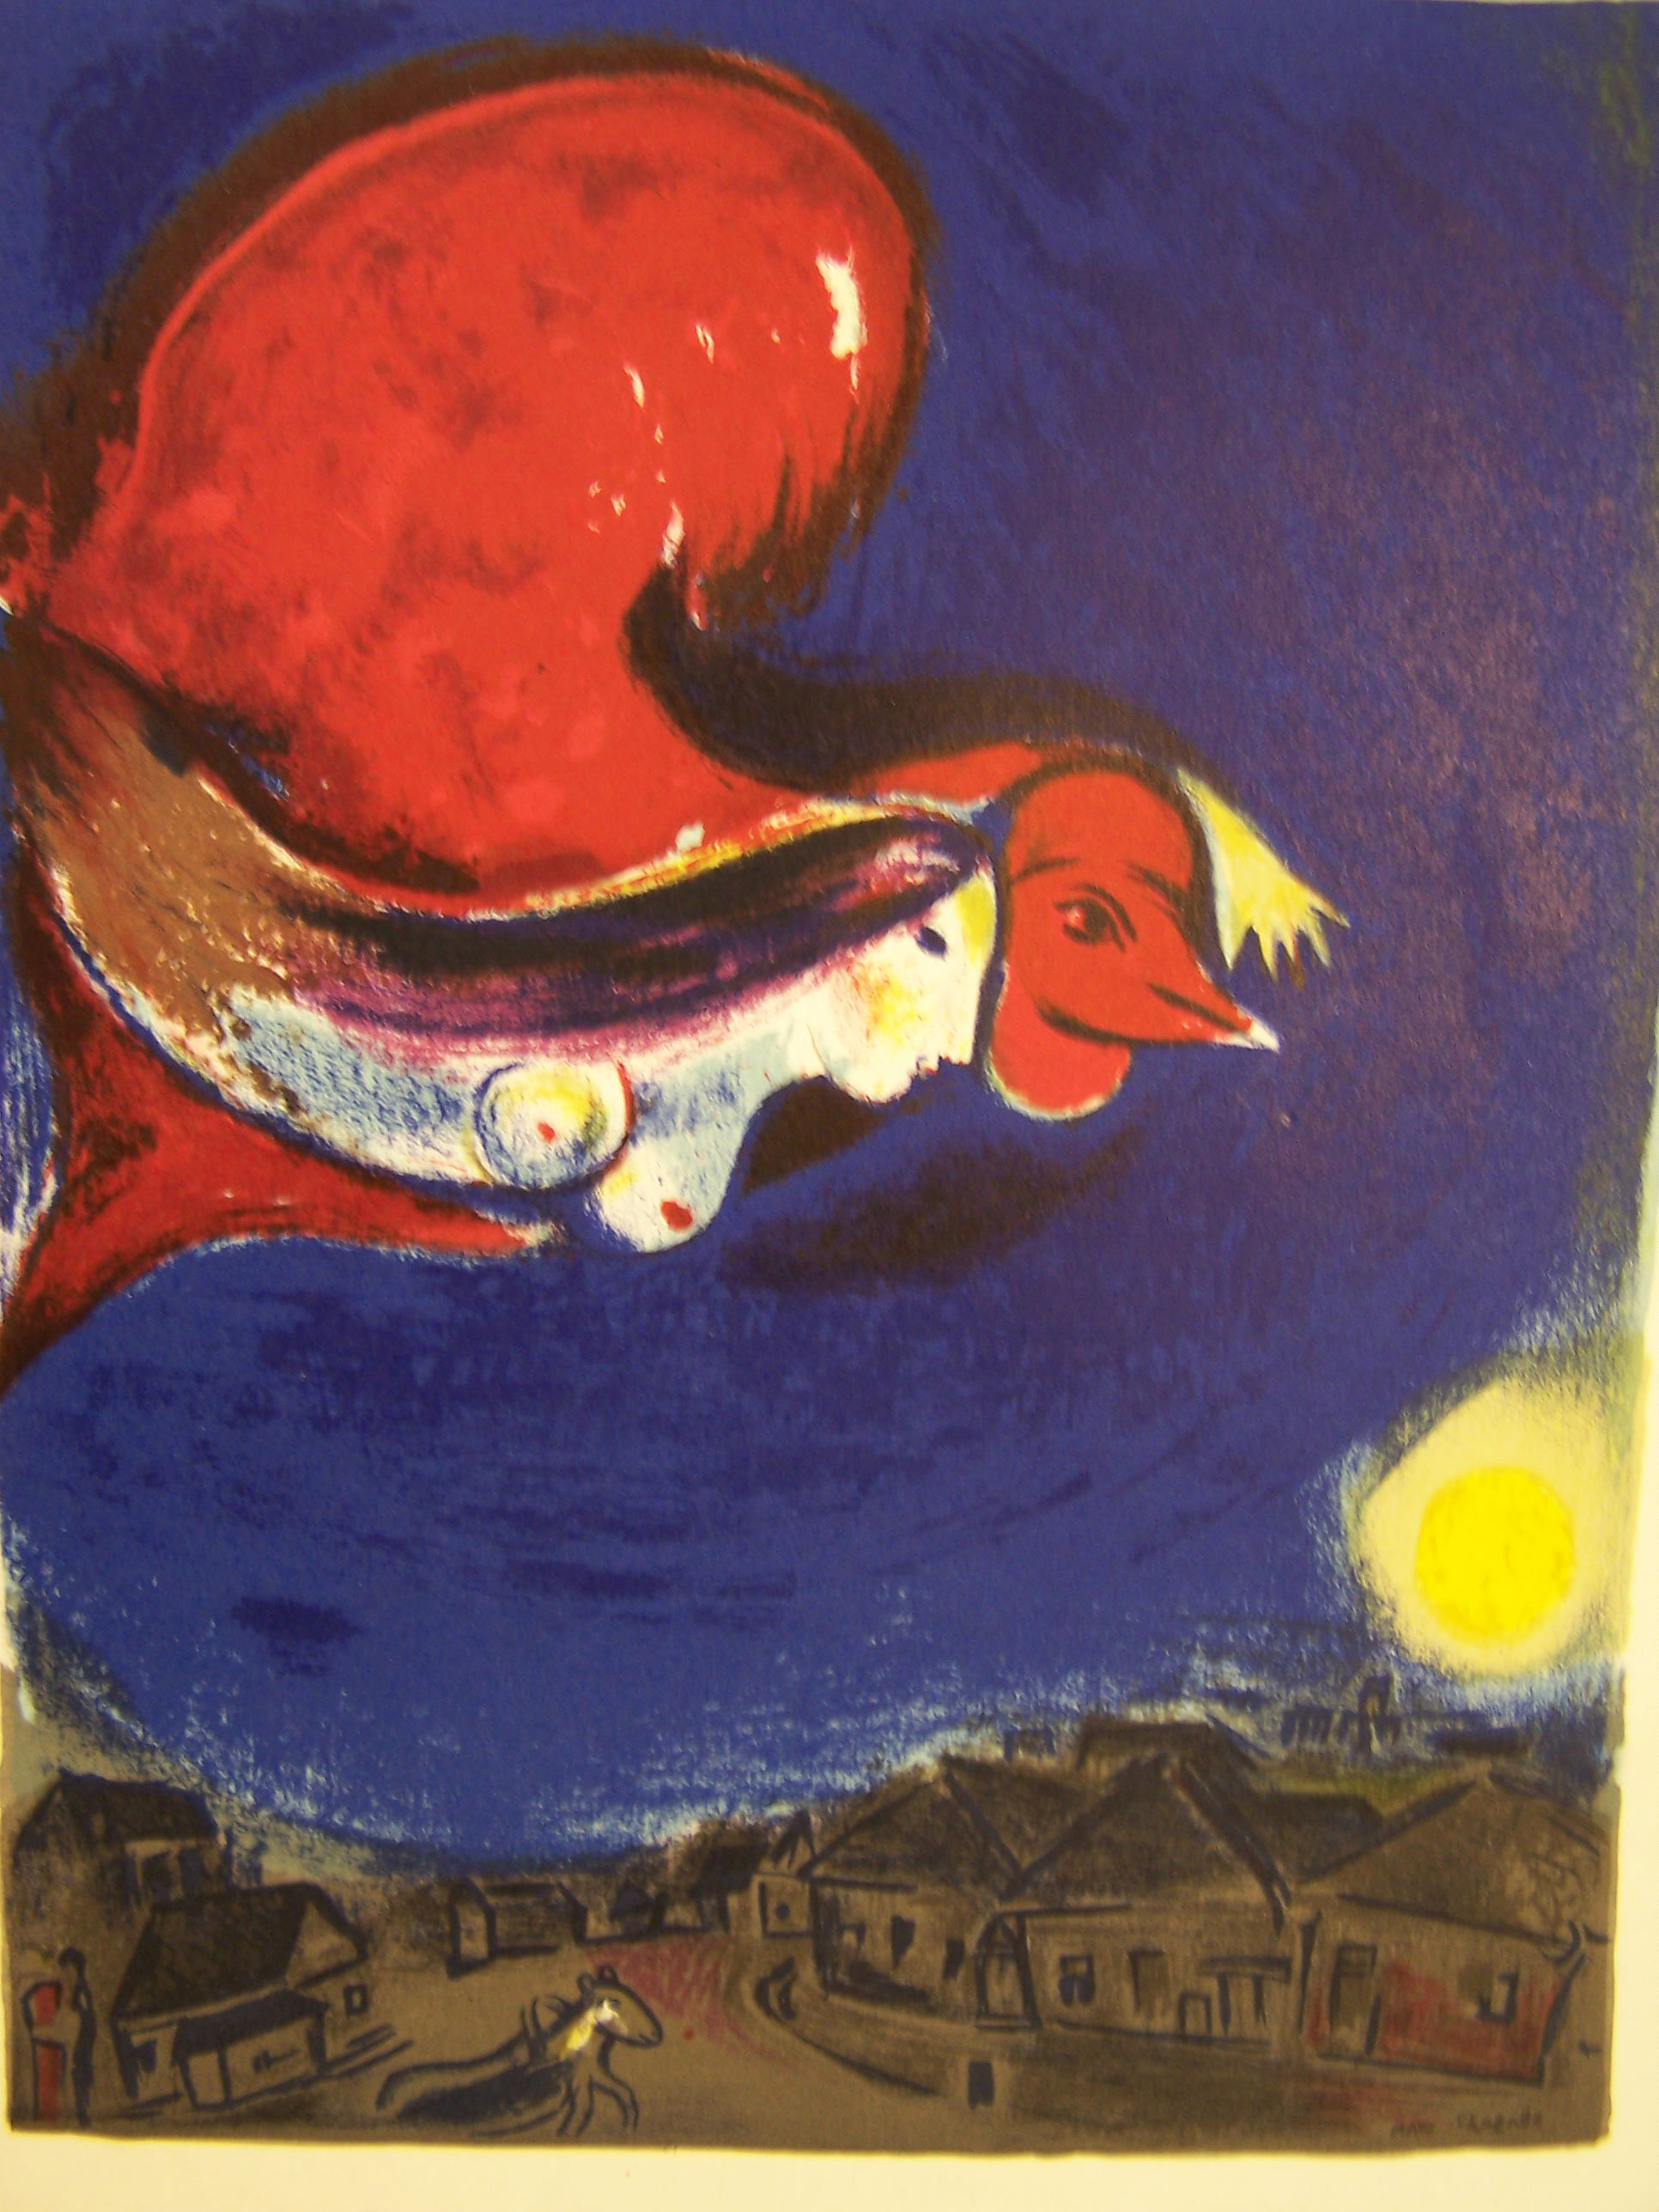 'The Dream' by Chagall.